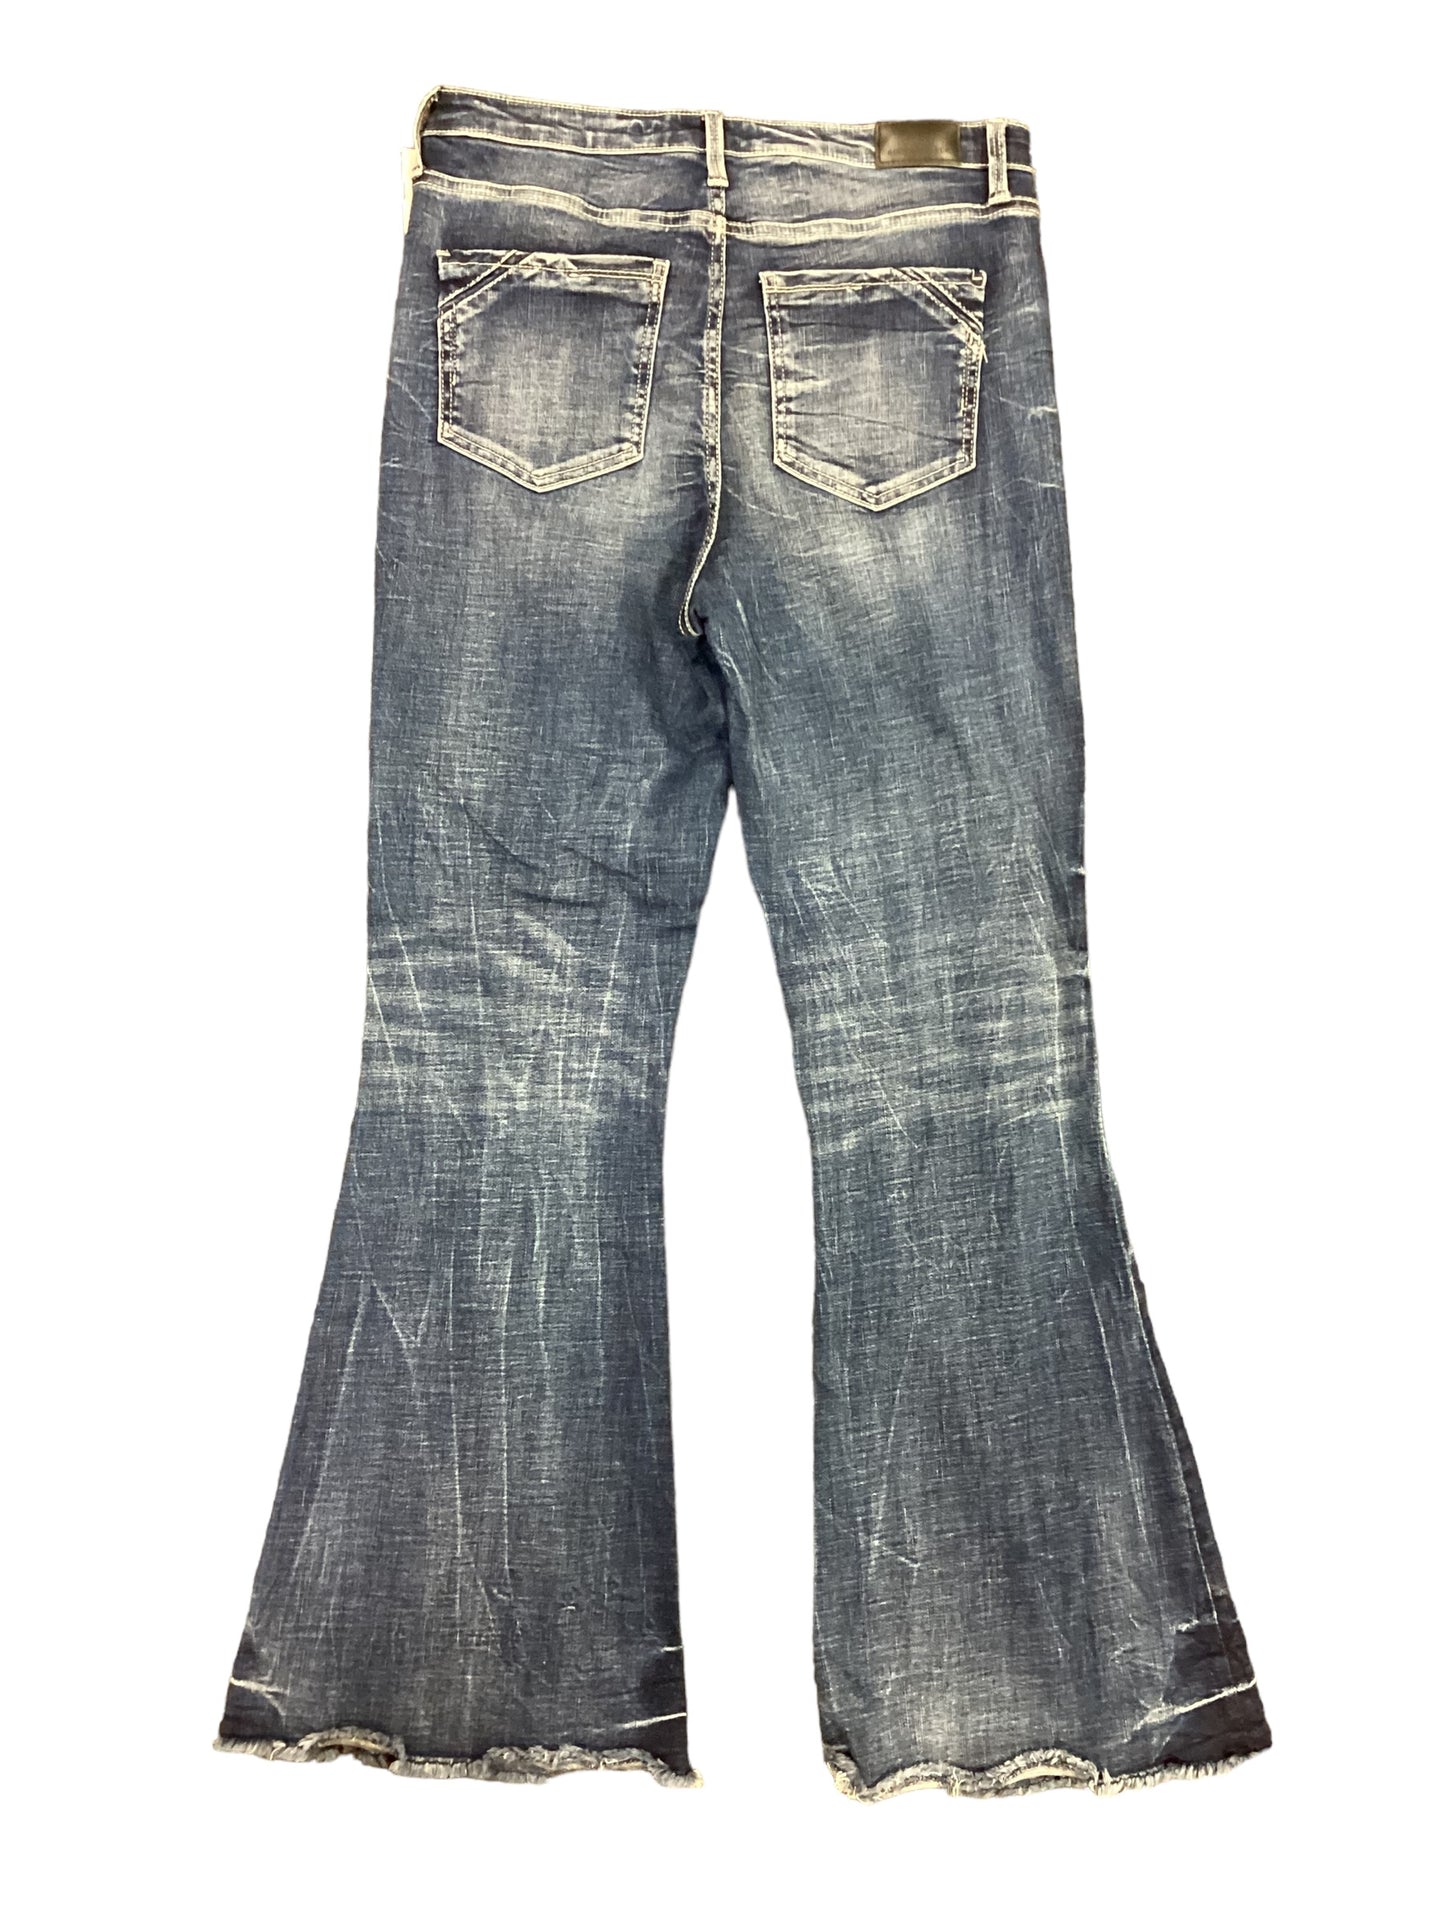 Jeans Flared By Buckle Black  Size: 10